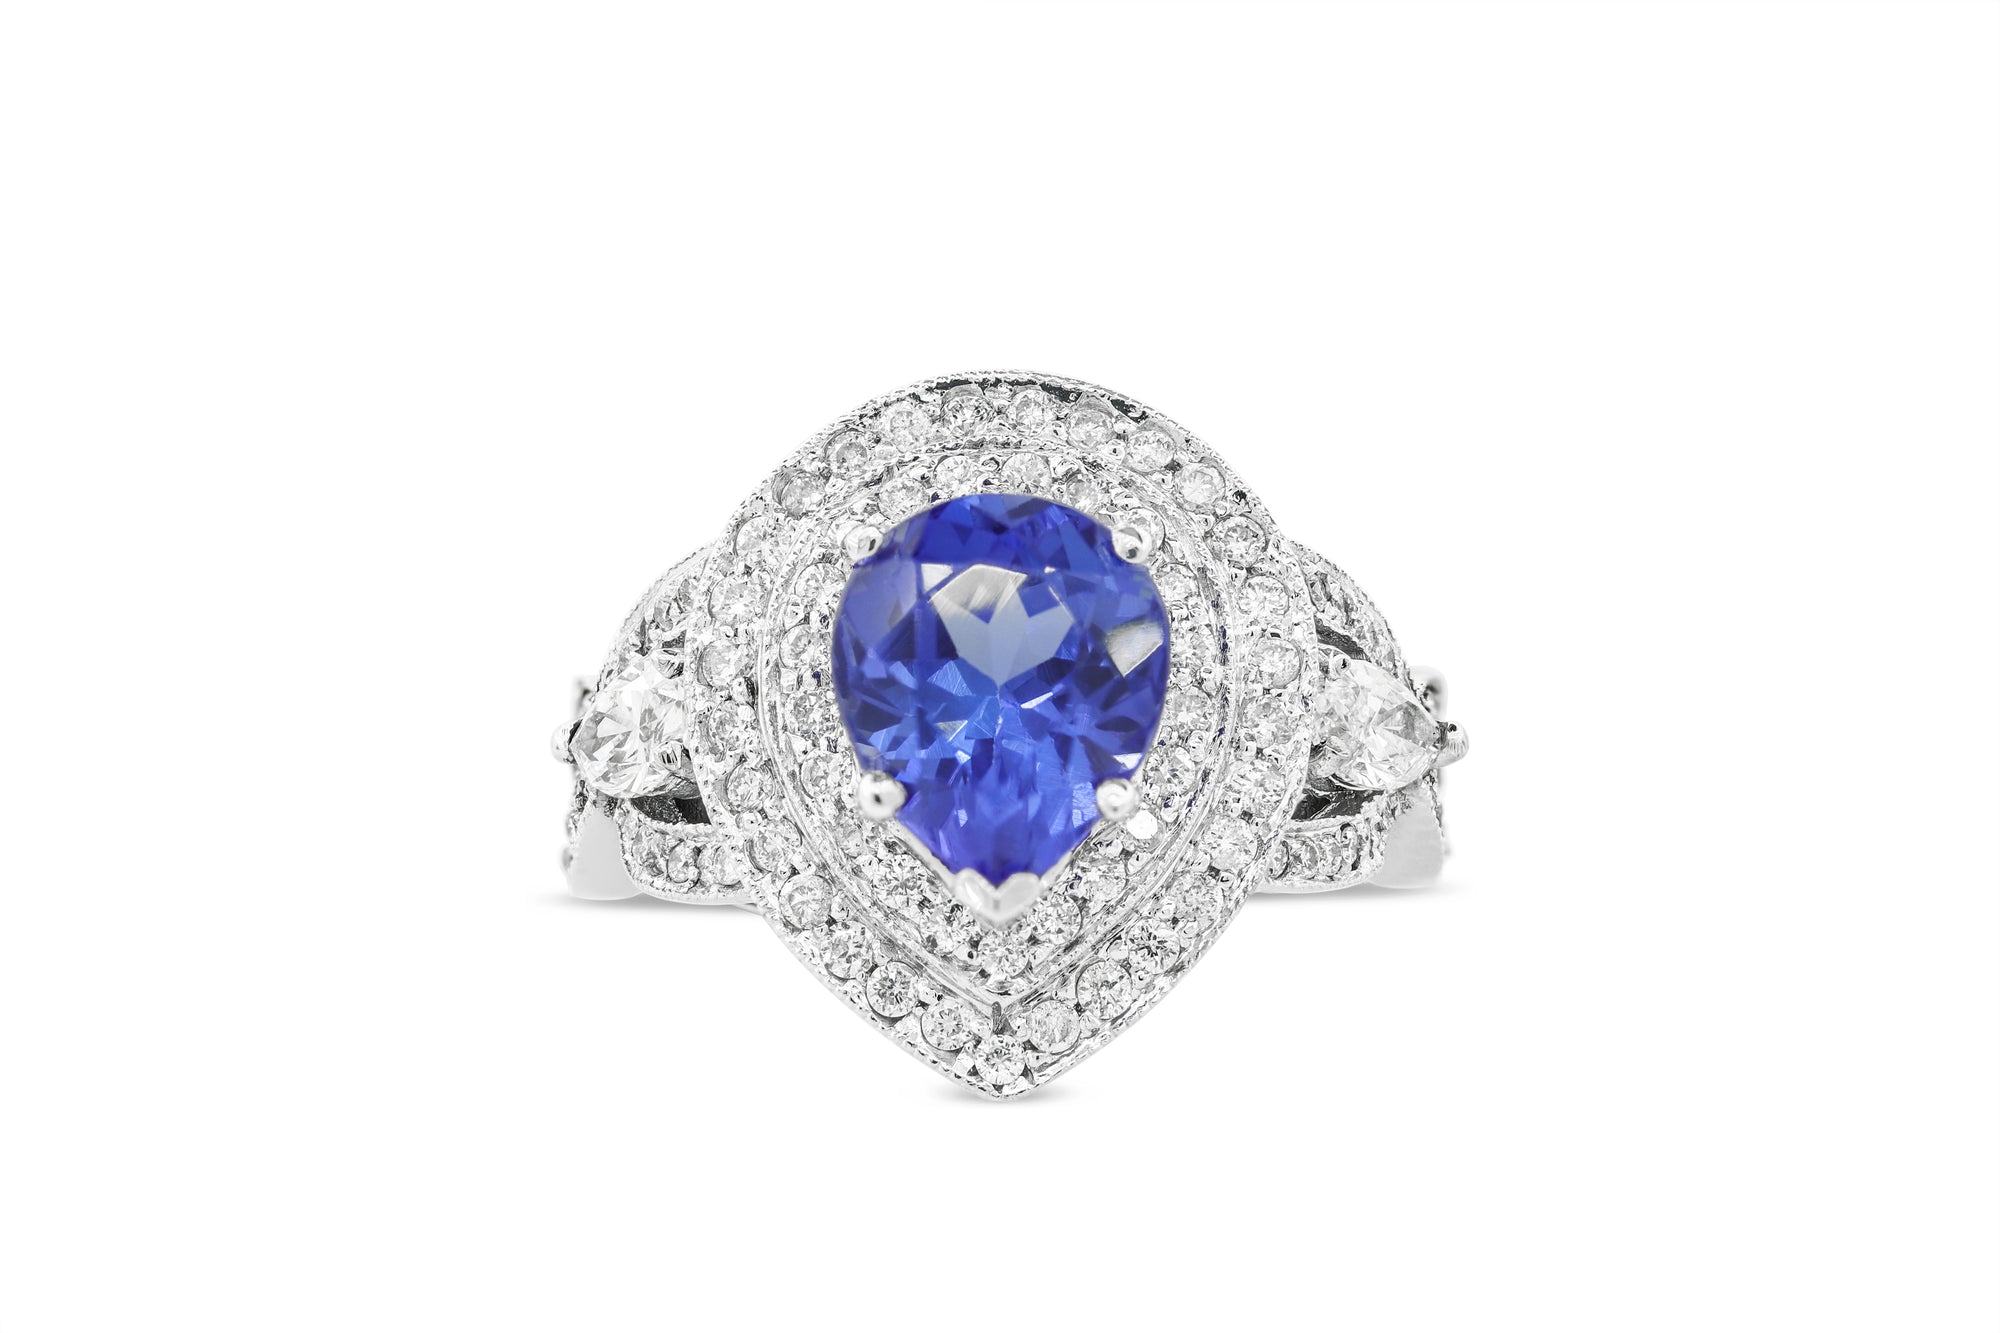 2.30 CT Pear Cut Tanzanite Diamond Ring 1.27 CT TW 14K White Gold TZR012 - NorthandSouthJewelry